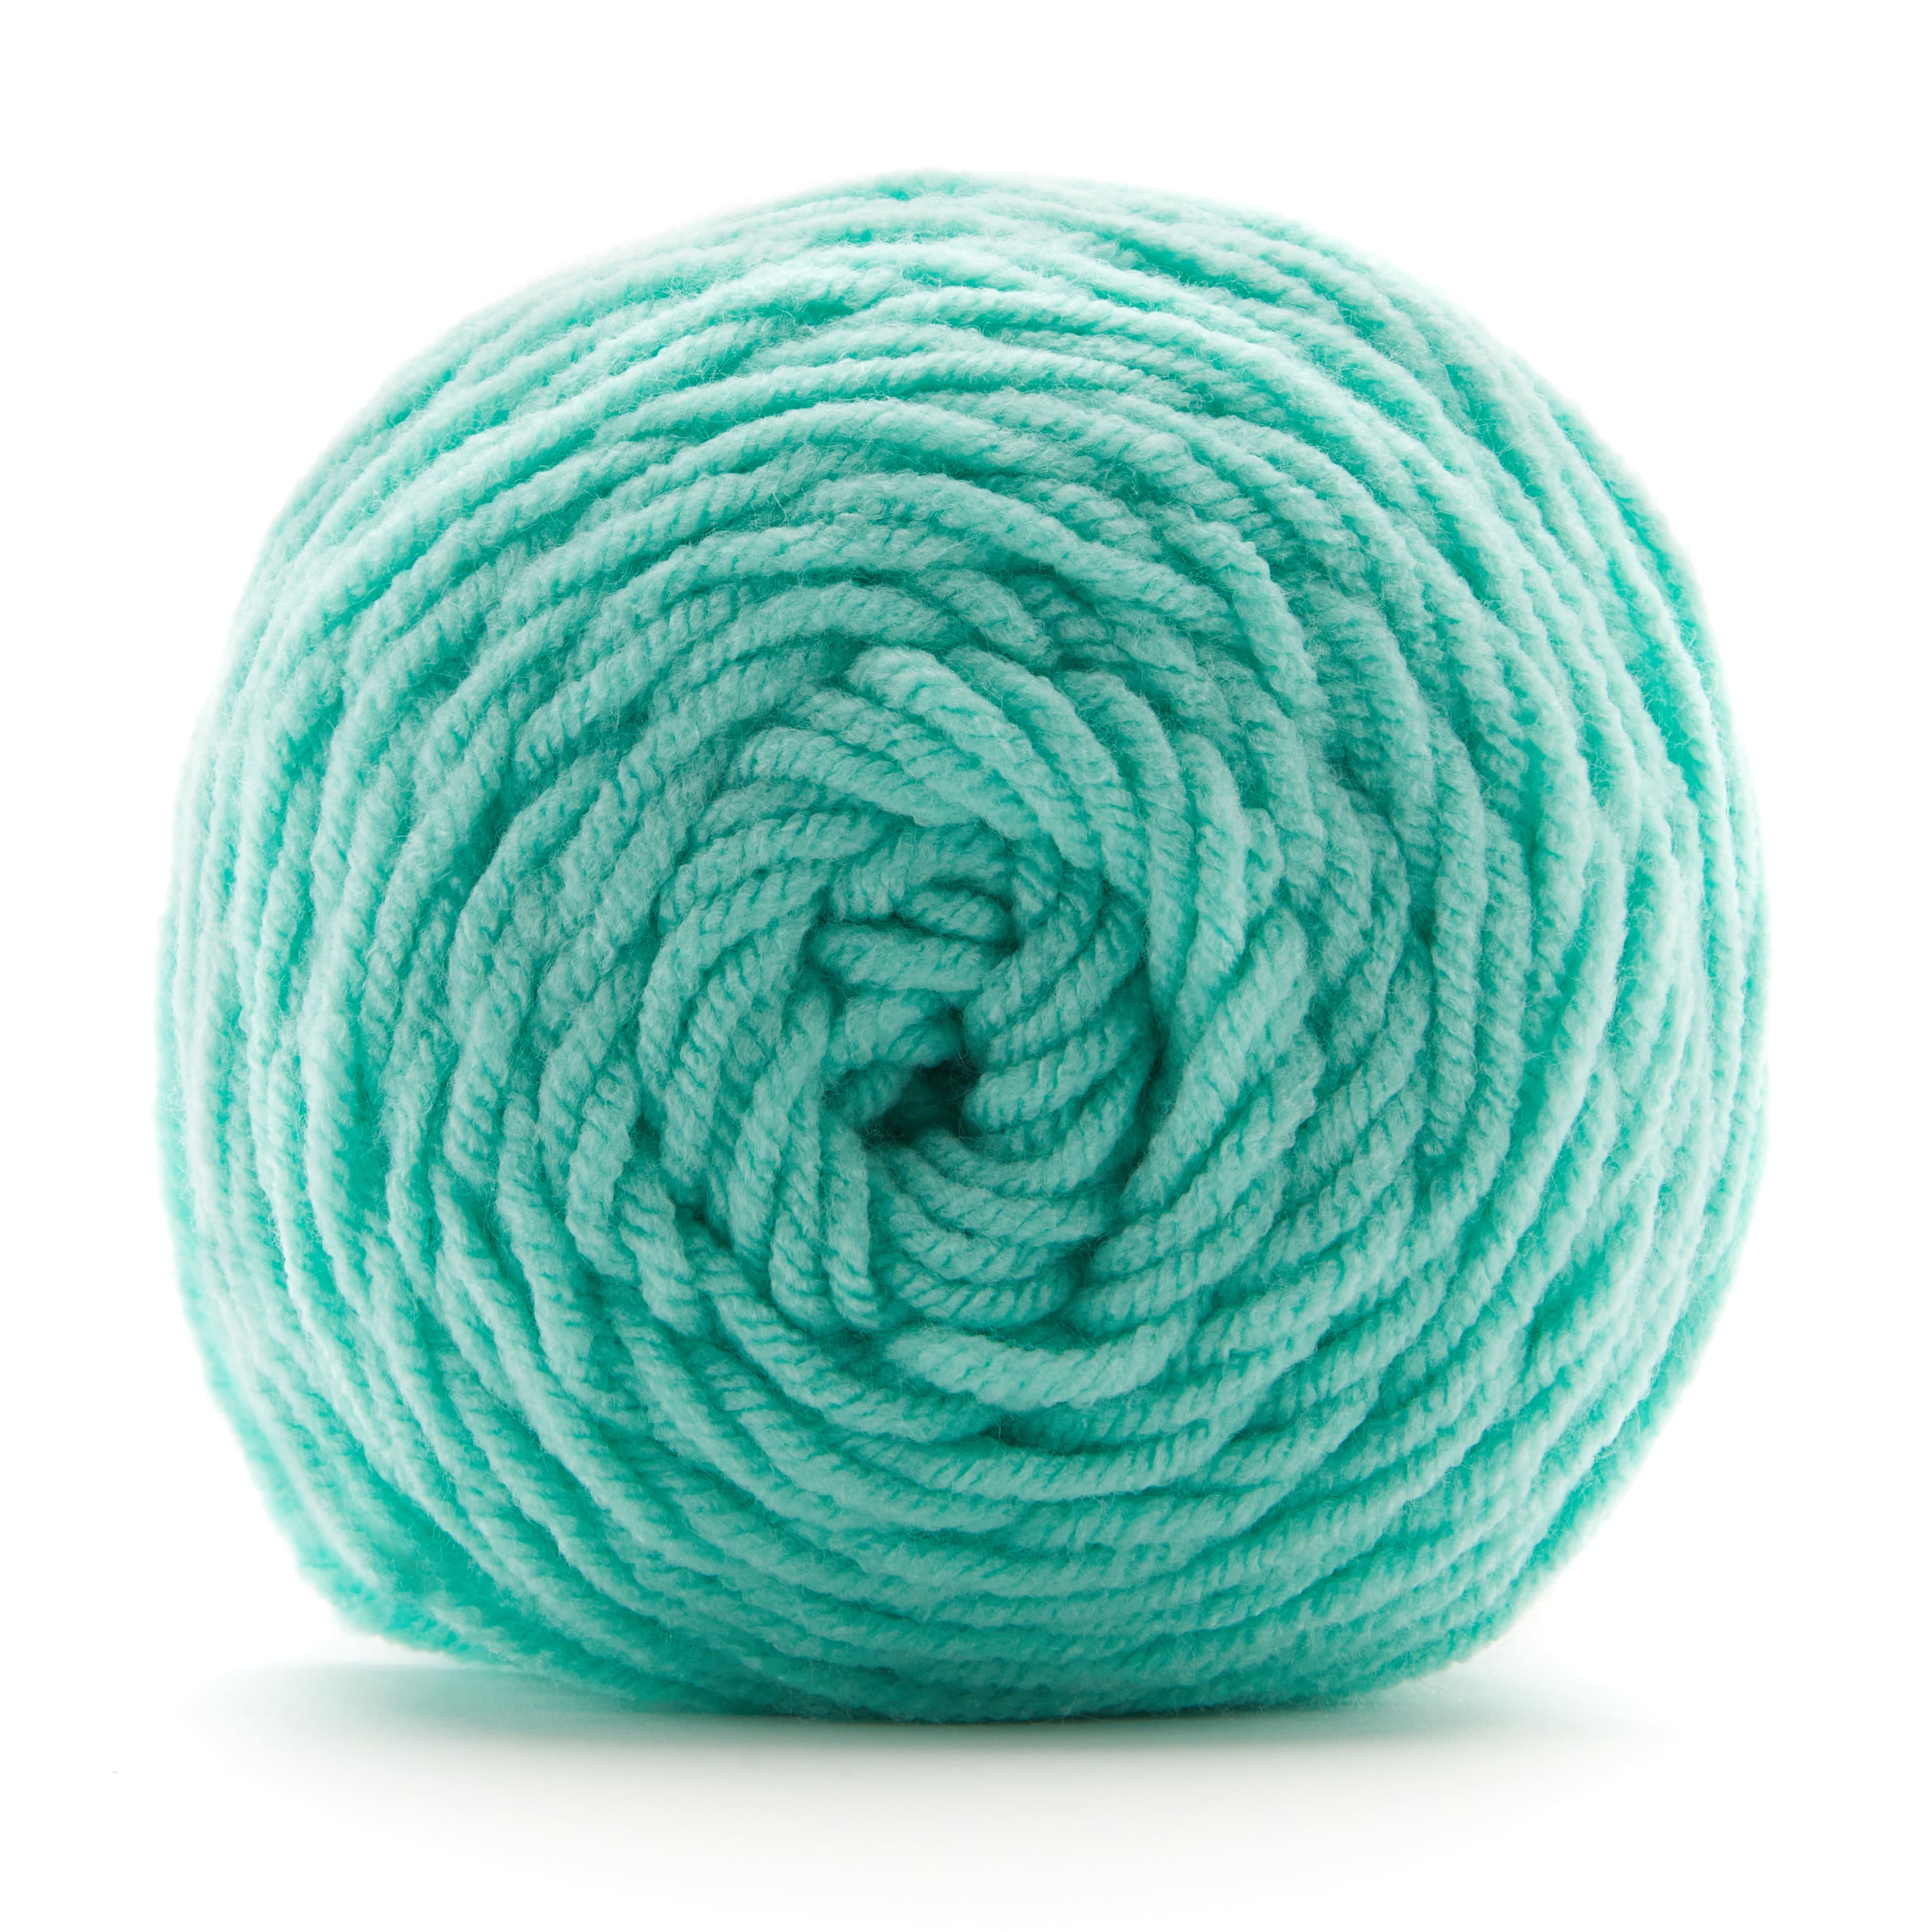 Soft Classic Solid Yarn by Loops & Threads - Solid Color Yarn for Knitting,  Crochet, Weaving, Arts & Crafts - Mint, Bulk 12 Pack